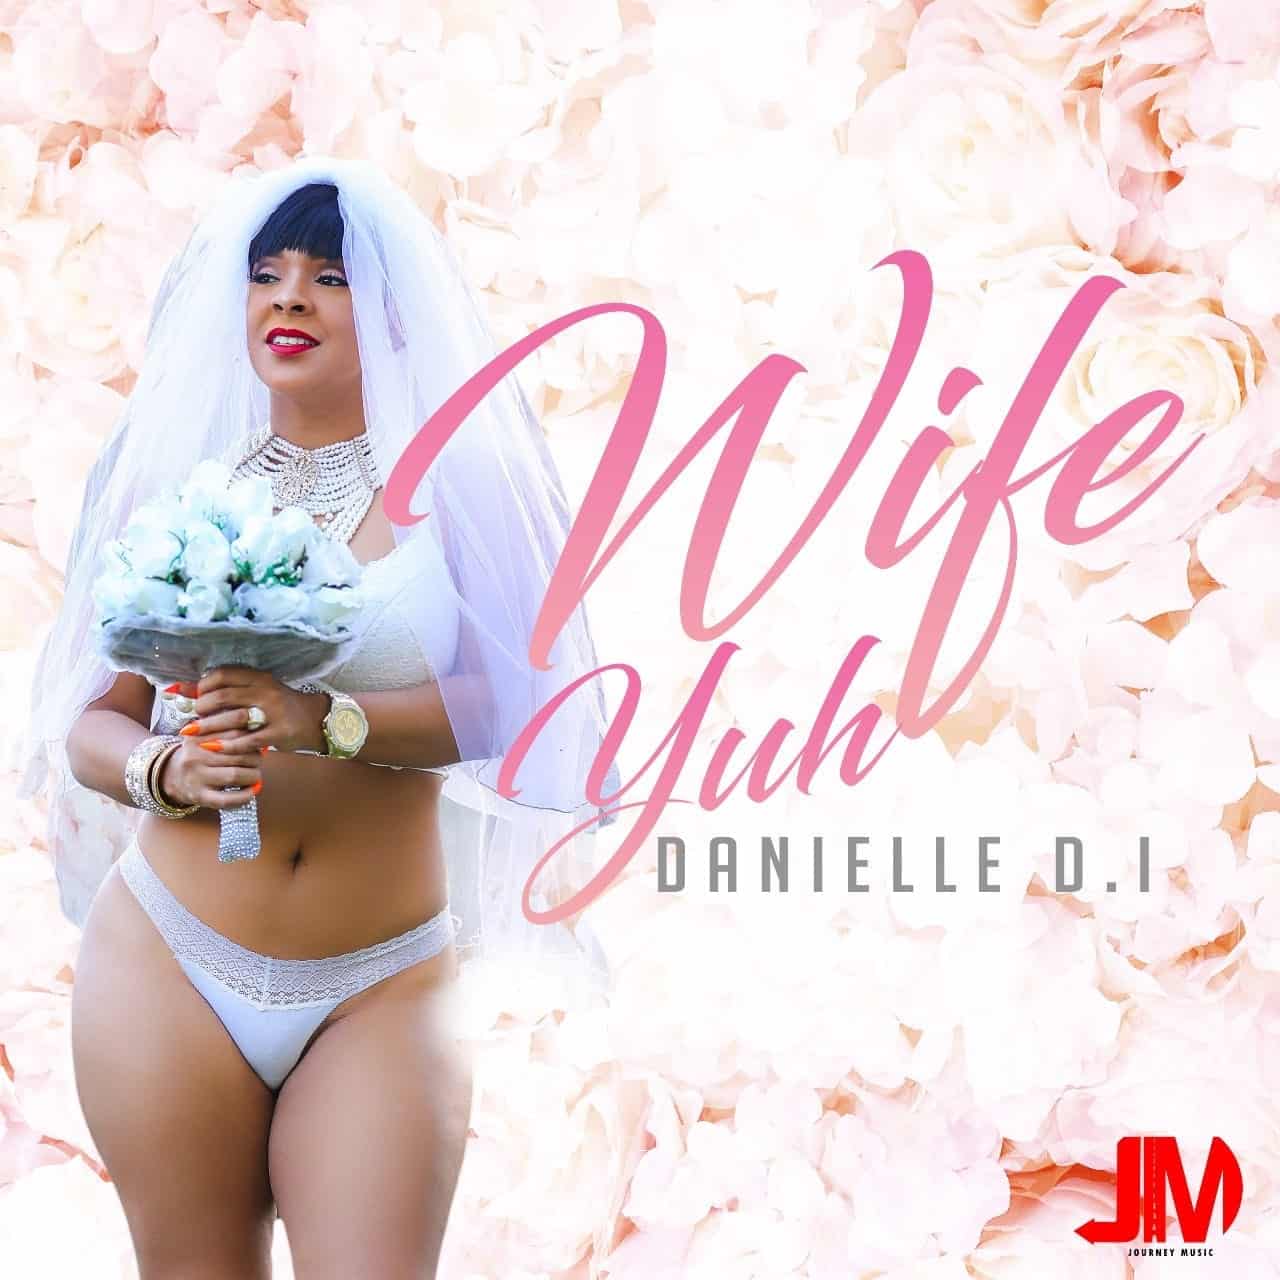 Danielle D.I. - Wife Yuh - Journey Music - Clean